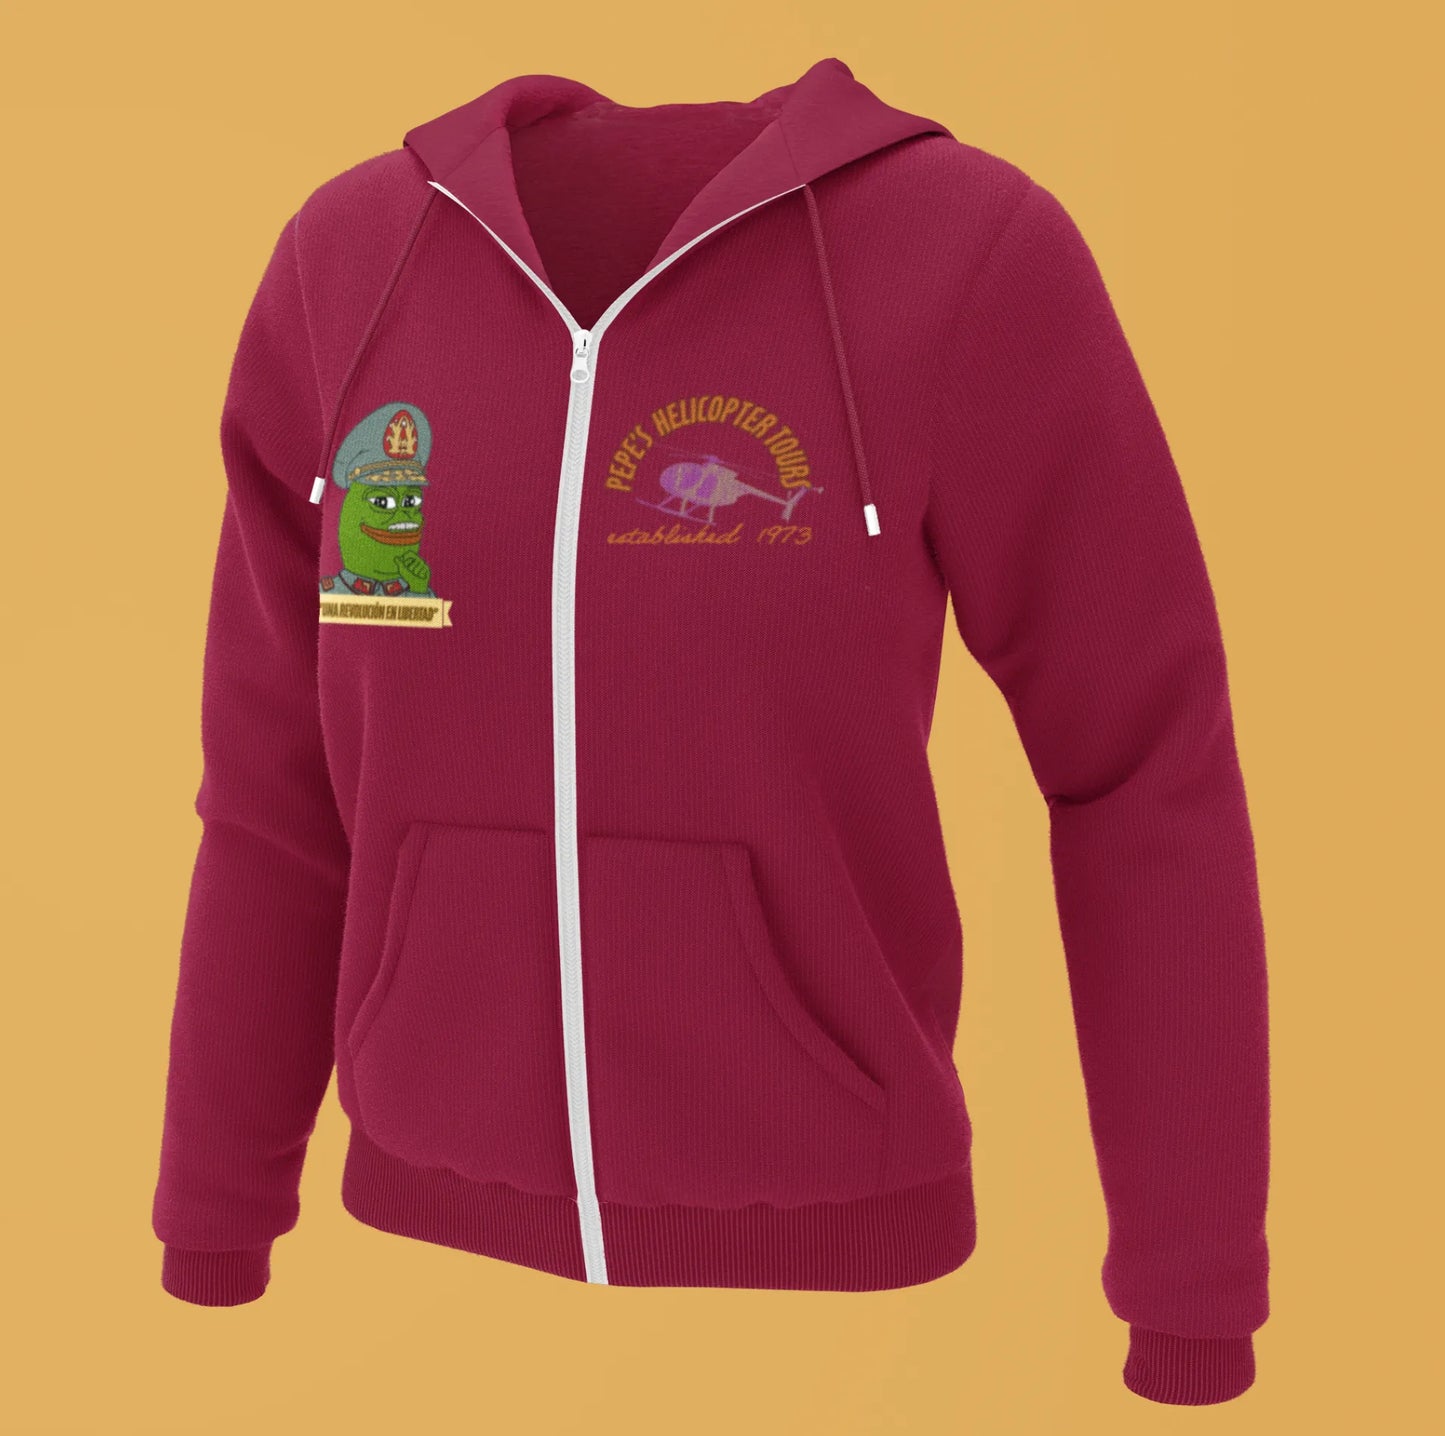 "Pepe's Helicopter Tours" Hoodie